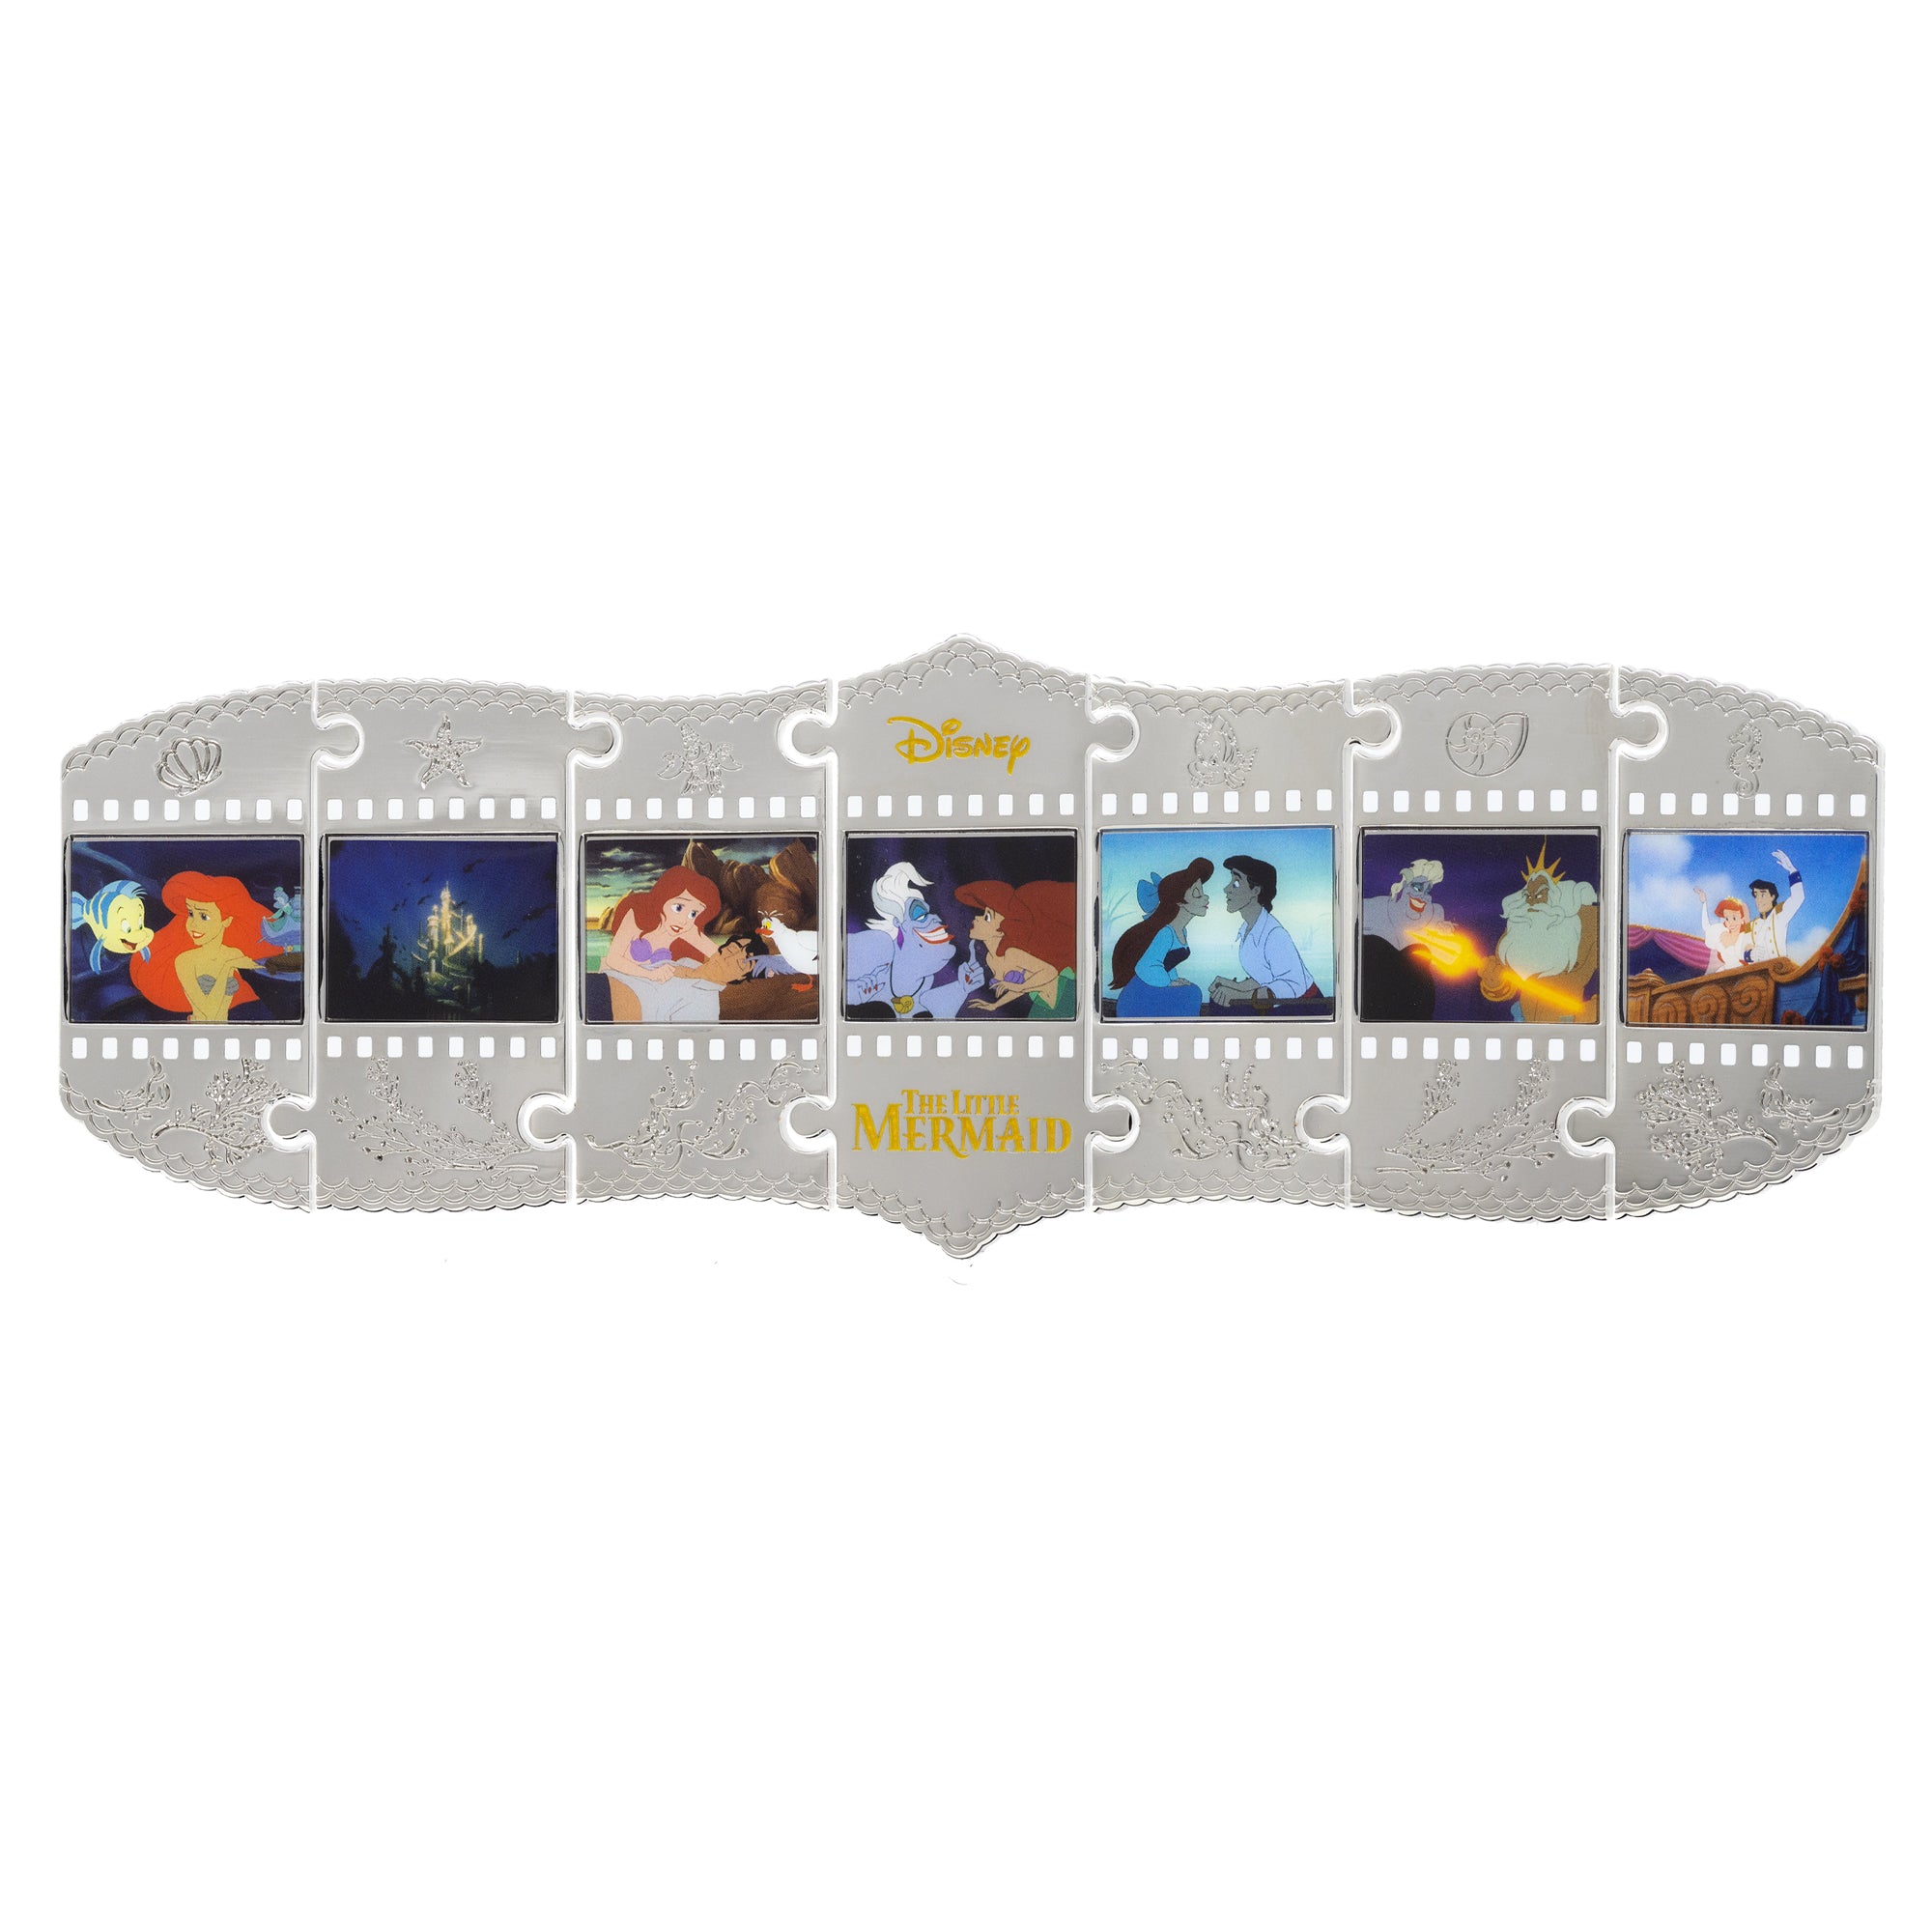 Disney The Little Mermaid Final Frames Puzzle Pin Series Mystery Surprise Pin - Limited Edition 300 - NEW RELEASE